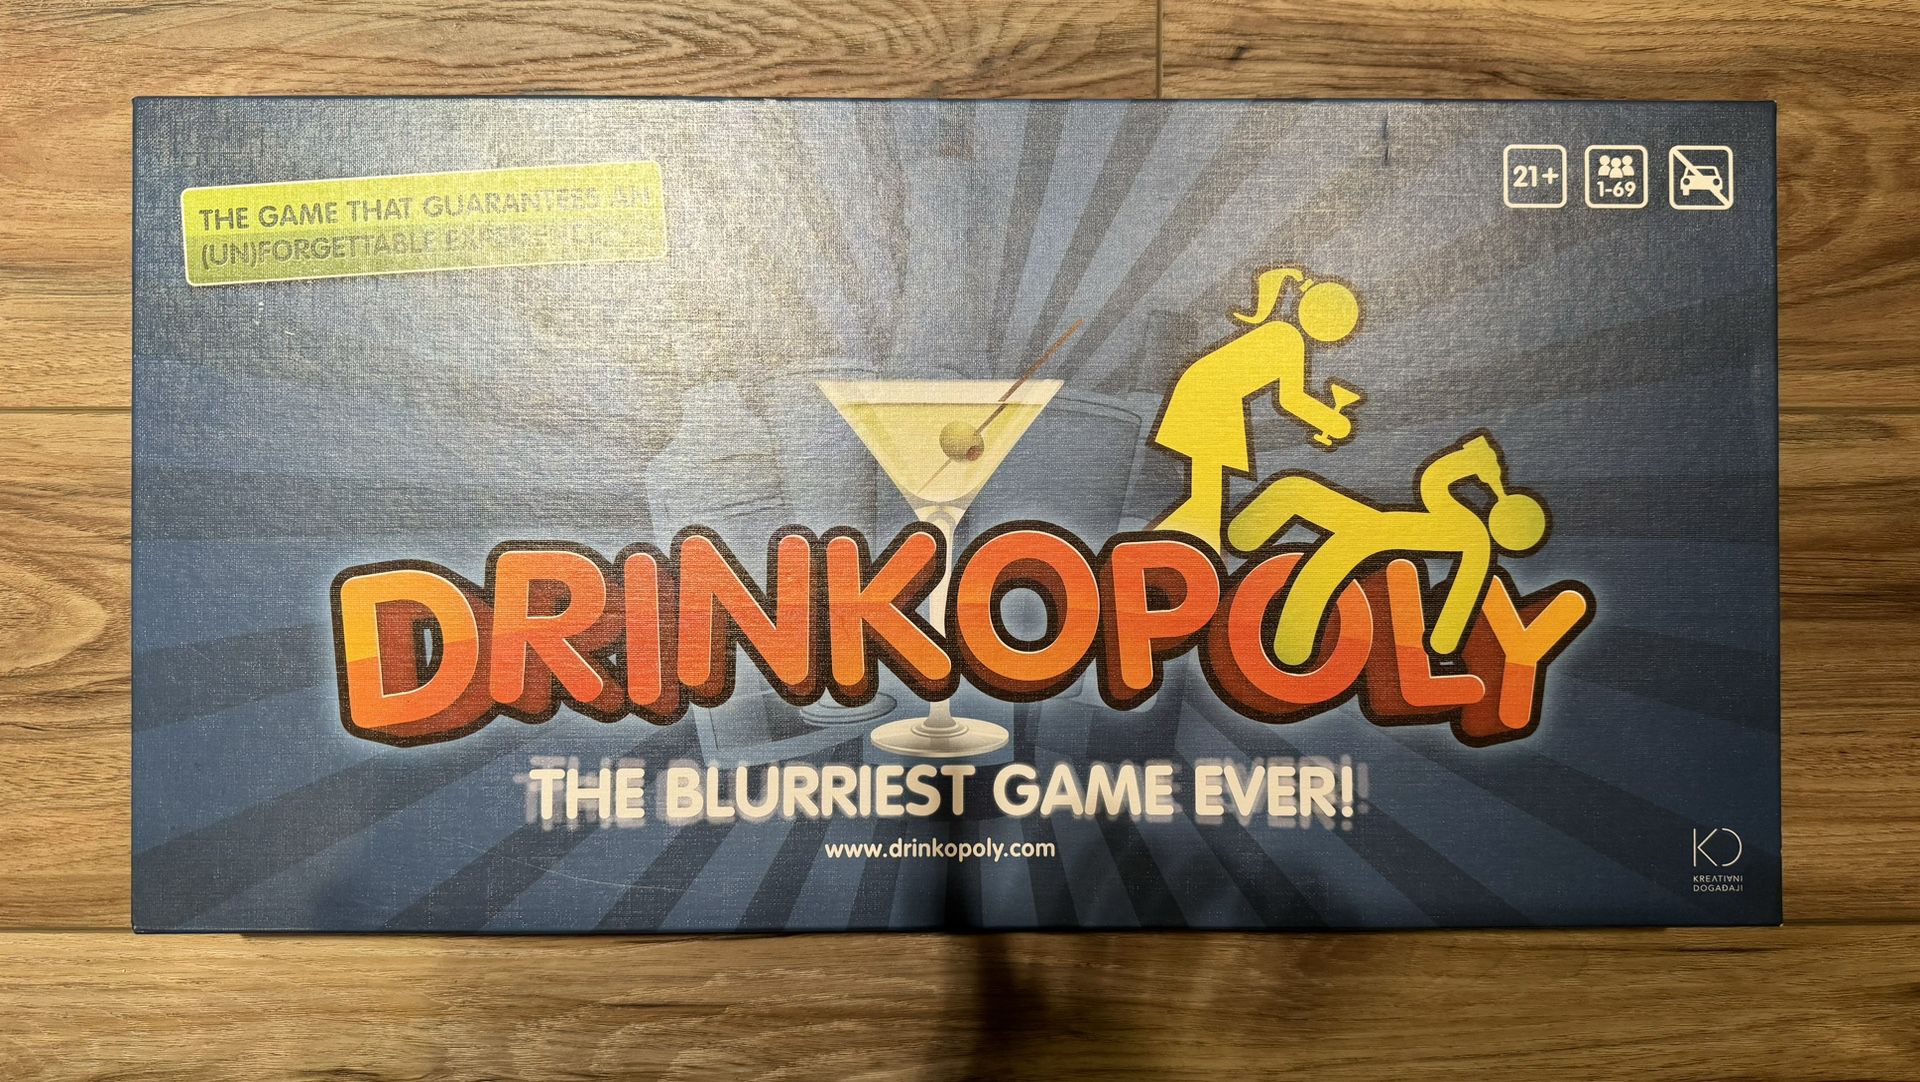 Drinkopoly Drinking Board Game - Adult Fun Party Game